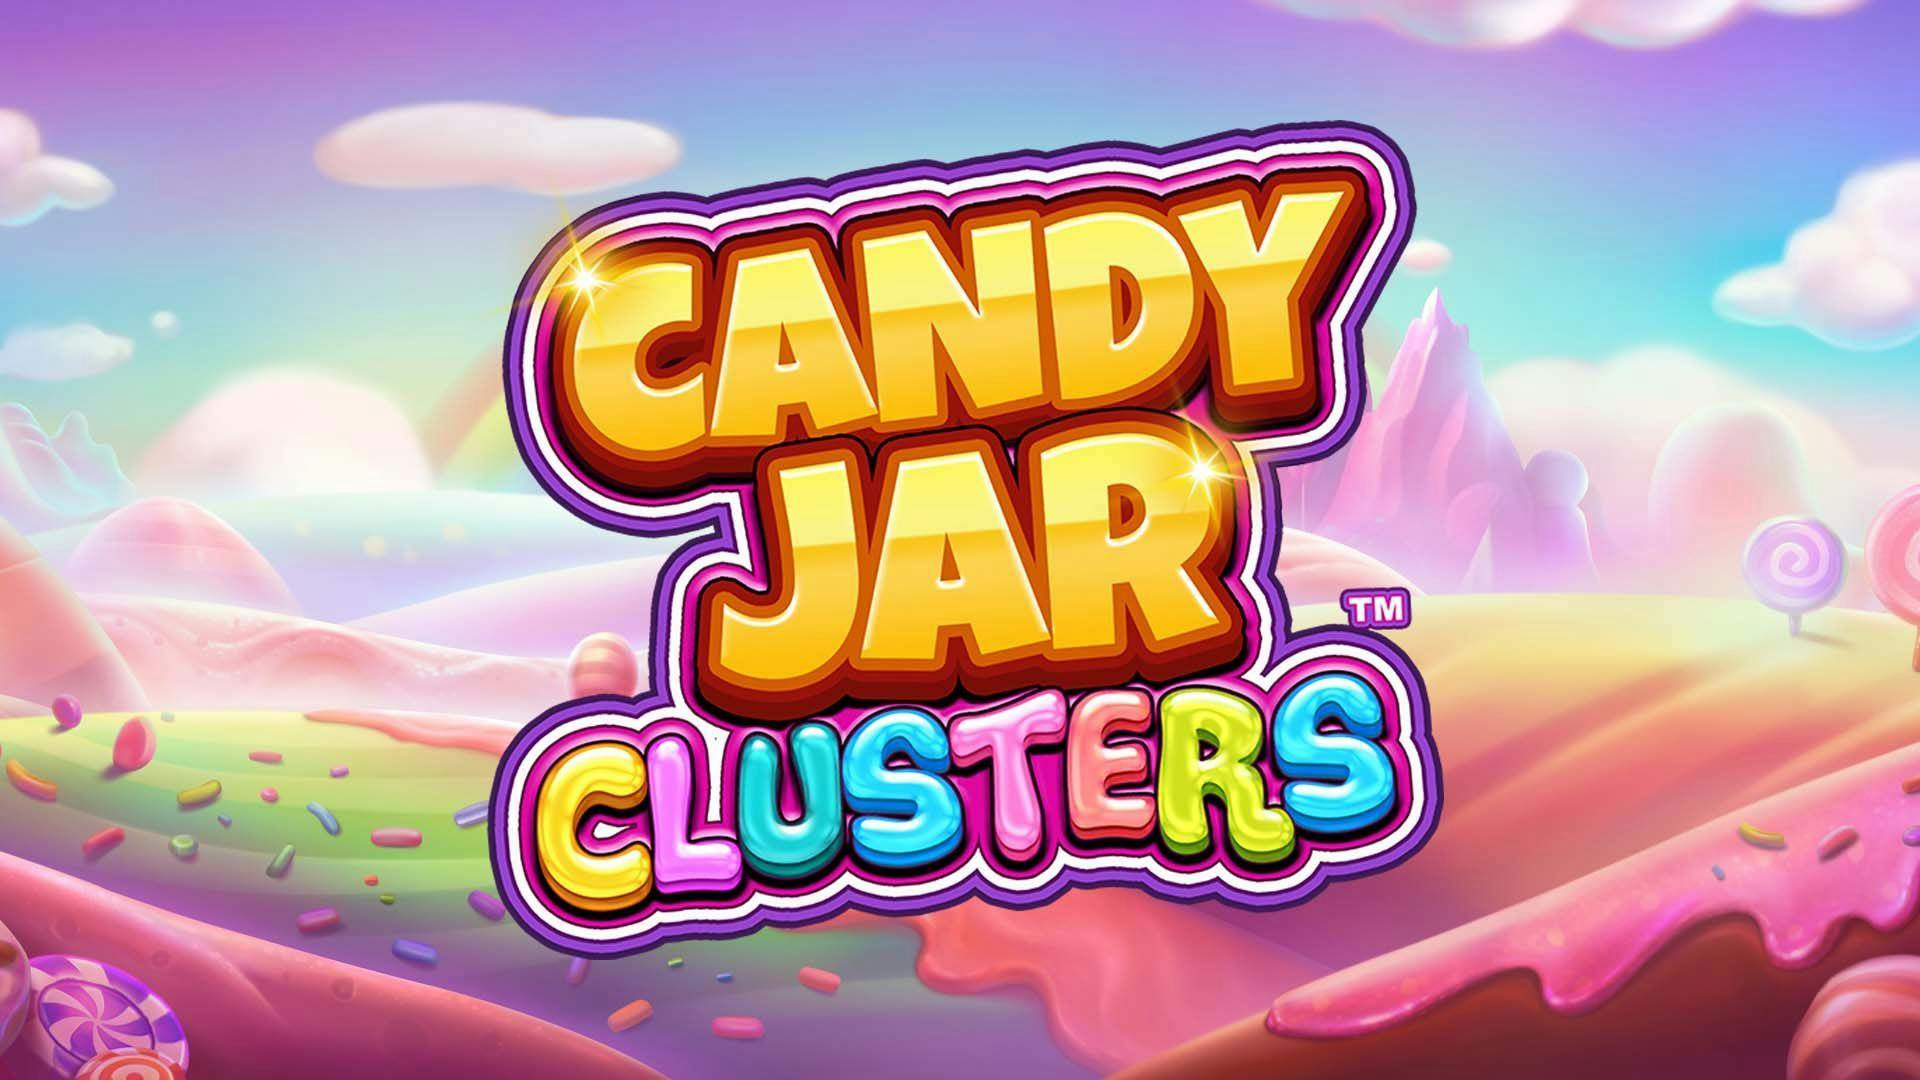 Candy Jar Clusters Slot Machine Online Free Game Play